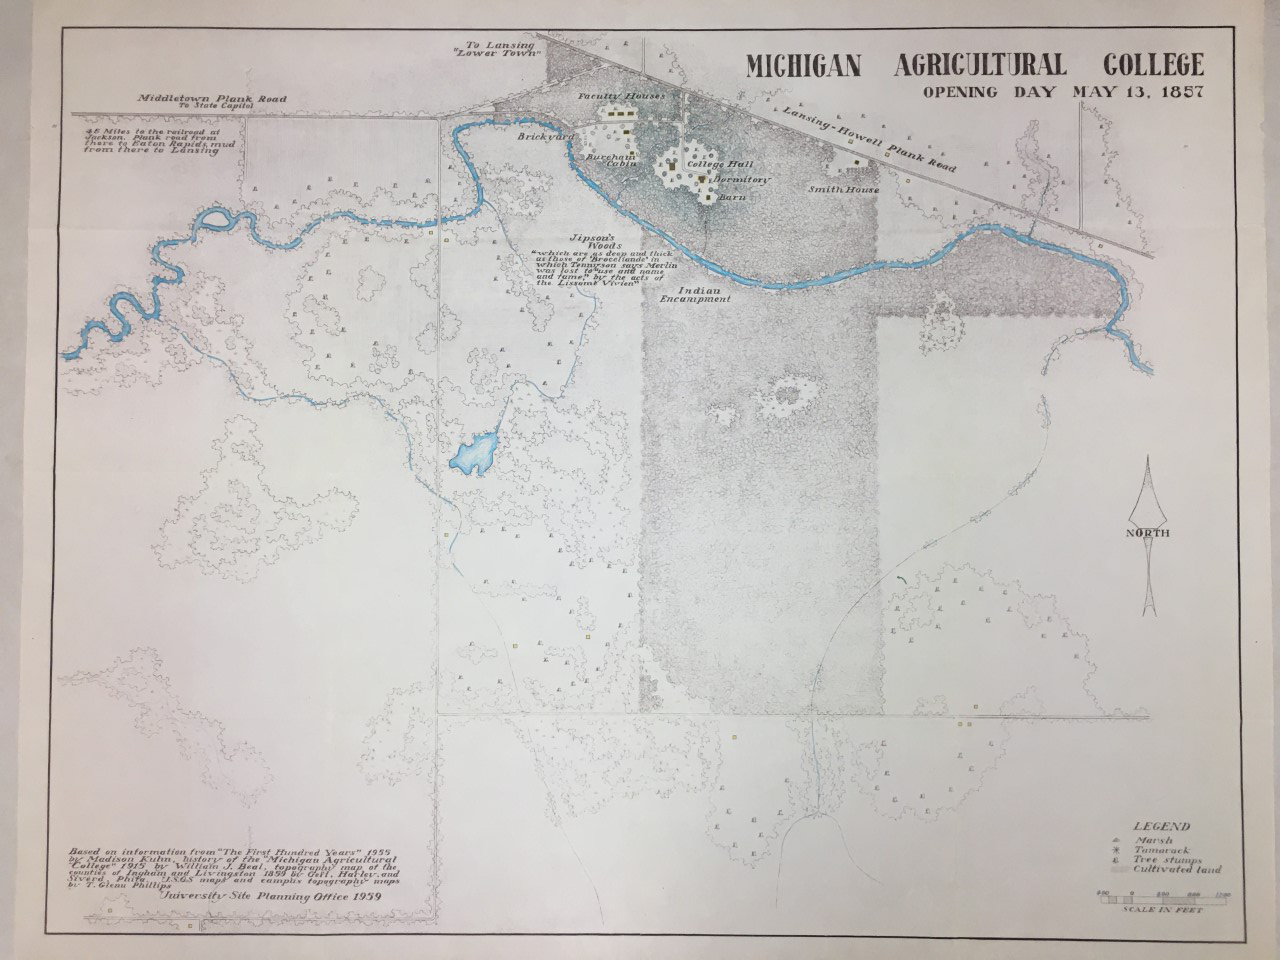 Old map of the Red Cedar River